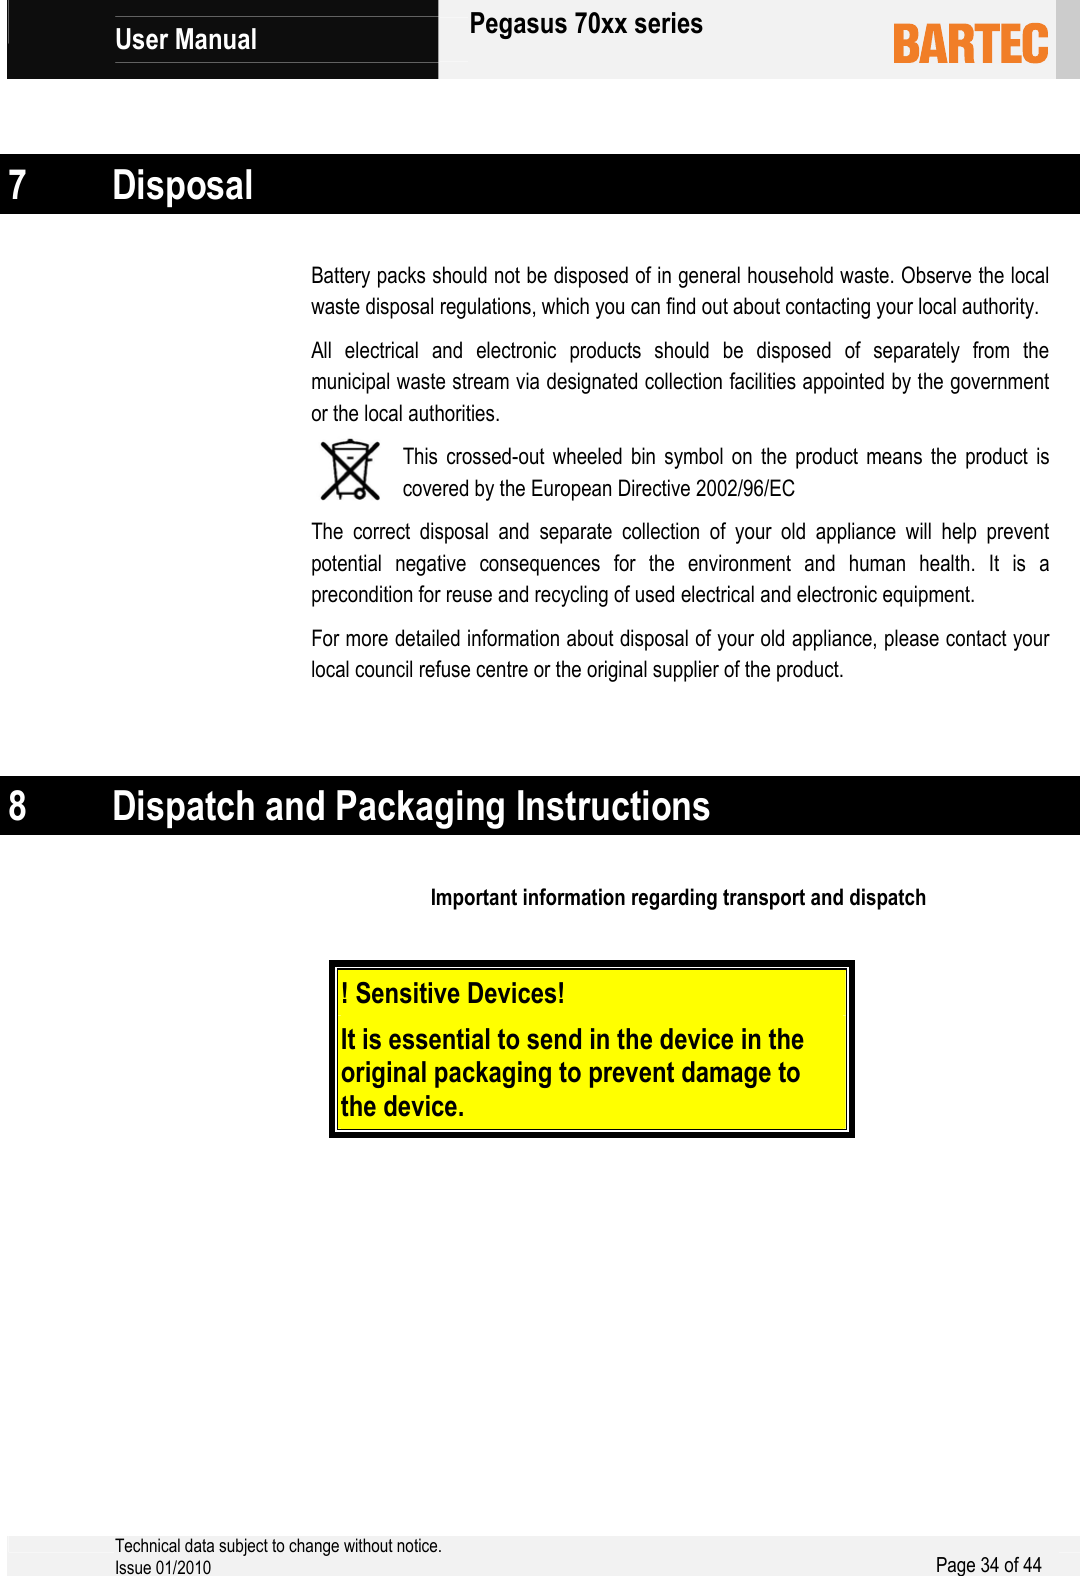             User Manual   Pegasus 70xx series     Technical data subject to change without notice. Issue 01/2010  Page 34 of 44    7 Disposal Battery packs should not be disposed of in general household waste. Observe the local waste disposal regulations, which you can find out about contacting your local authority. All electrical and electronic products should be disposed of separately from the municipal waste stream via designated collection facilities appointed by the government or the local authorities. This crossed-out wheeled bin symbol on the product means the product is covered by the European Directive 2002/96/EC The correct disposal and separate collection of your old appliance will help prevent potential negative consequences for the environment and human health. It is a precondition for reuse and recycling of used electrical and electronic equipment. For more detailed information about disposal of your old appliance, please contact your local council refuse centre or the original supplier of the product.   8 Dispatch and Packaging Instructions Important information regarding transport and dispatch   ! Sensitive Devices!    It is essential to send in the device in the original packaging to prevent damage to the device.     